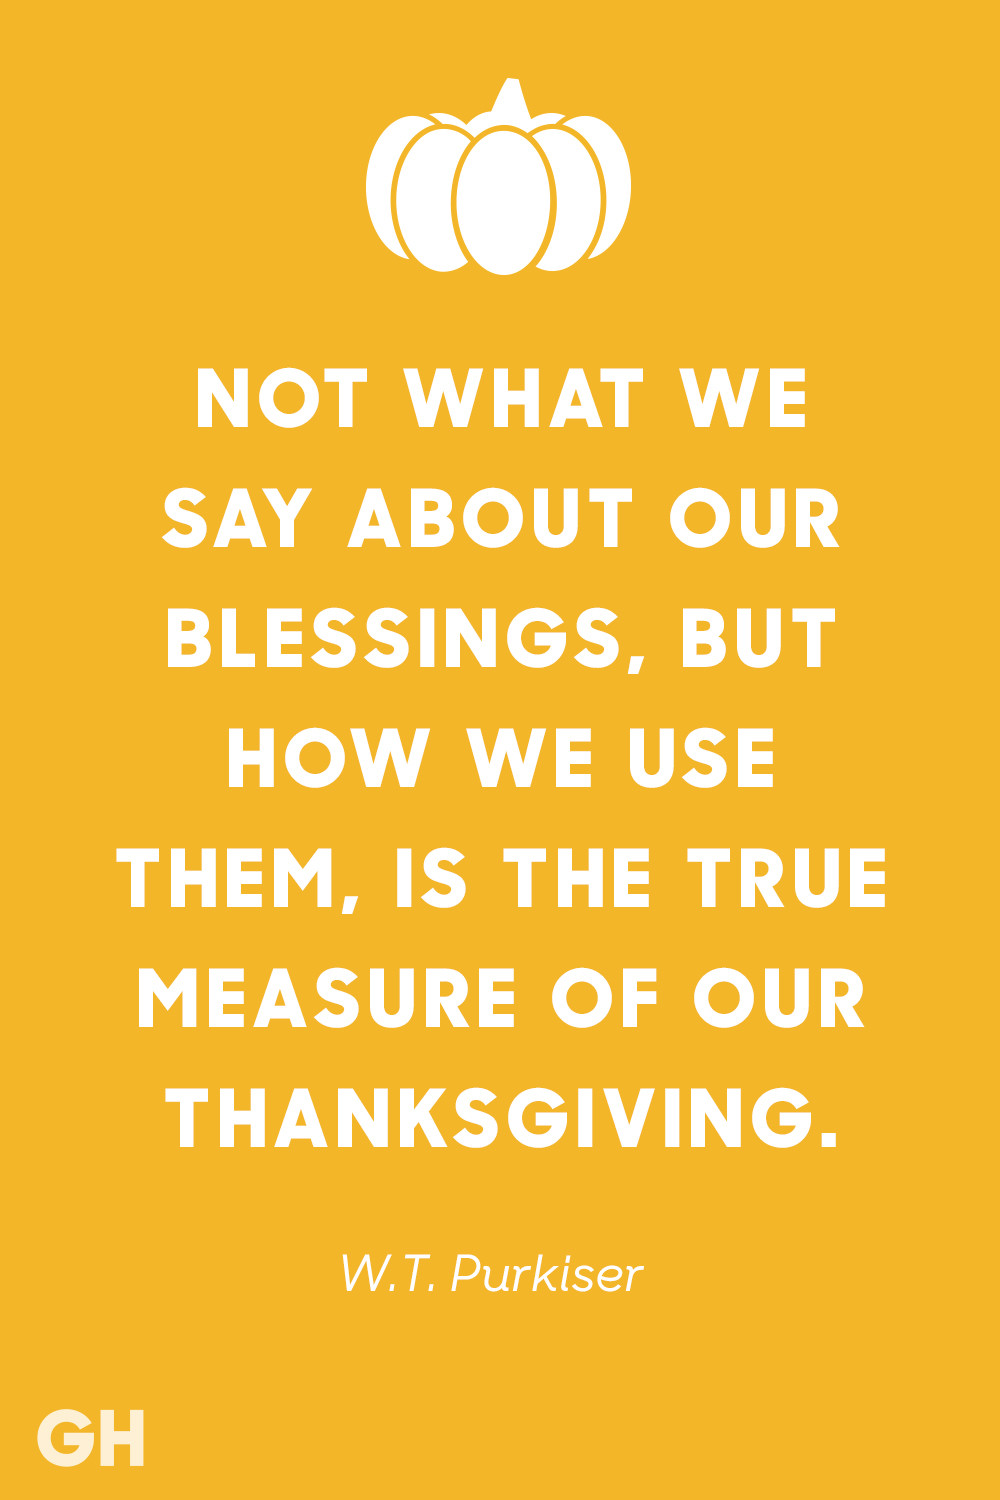 Quote Of Thanksgiving
 15 Best Thanksgiving Quotes Inspirational and Funny